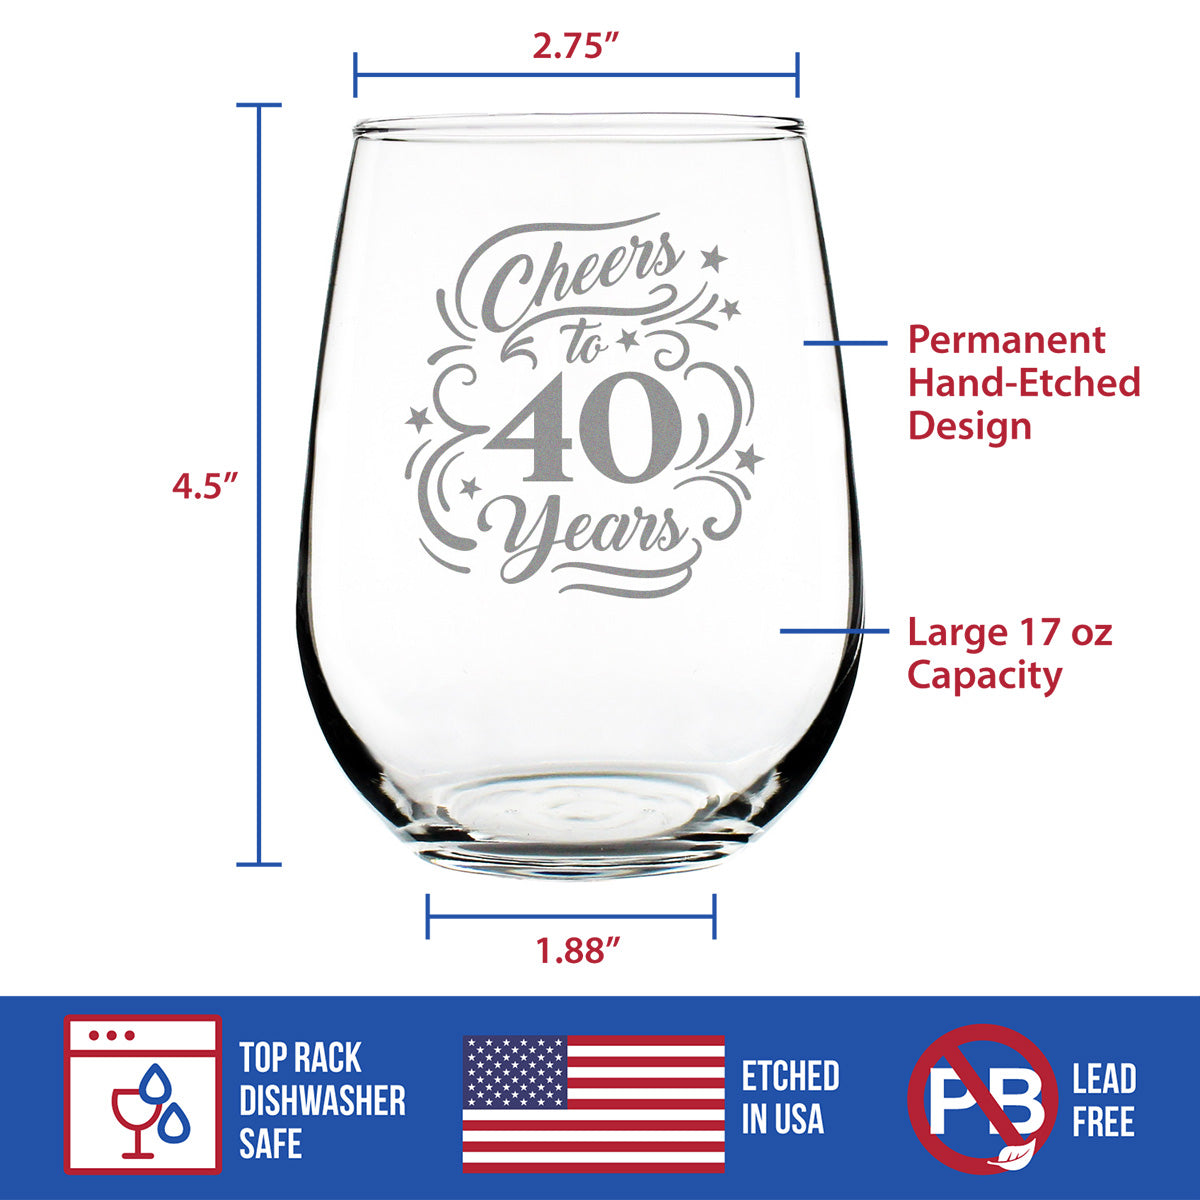 Cheers to 40 Years - Stemless Wine Glass Gifts for Women &amp; Men - 40th Anniversary or Birthday Party Decor - Large Glasses